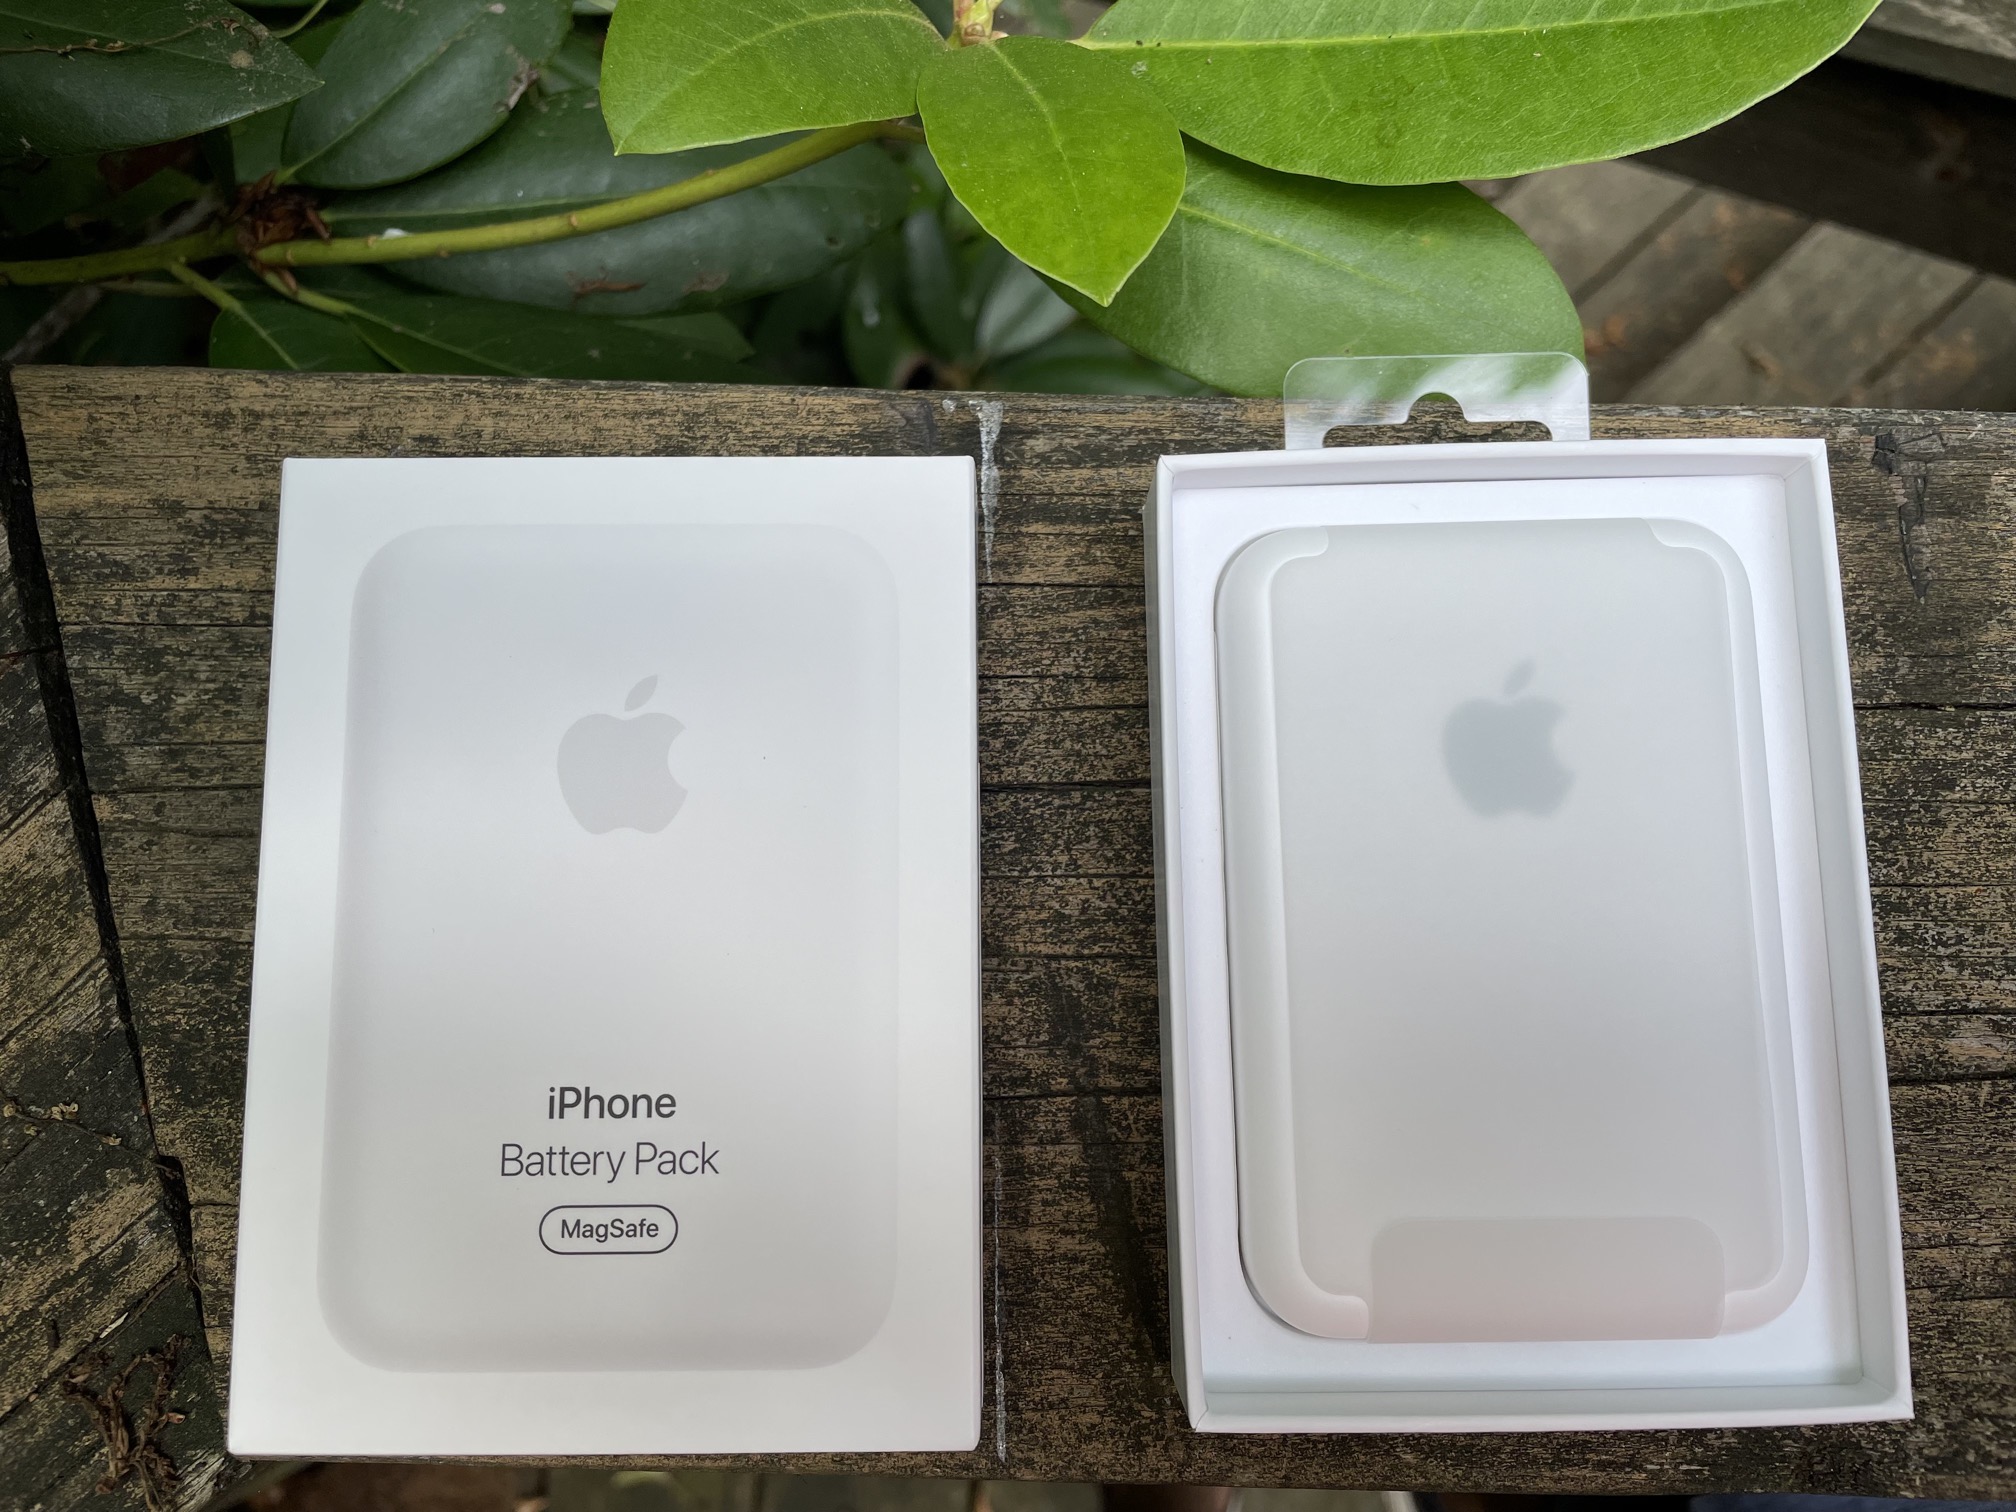 The MagSafe Battery Pack resting in its packaging on a wooden railing